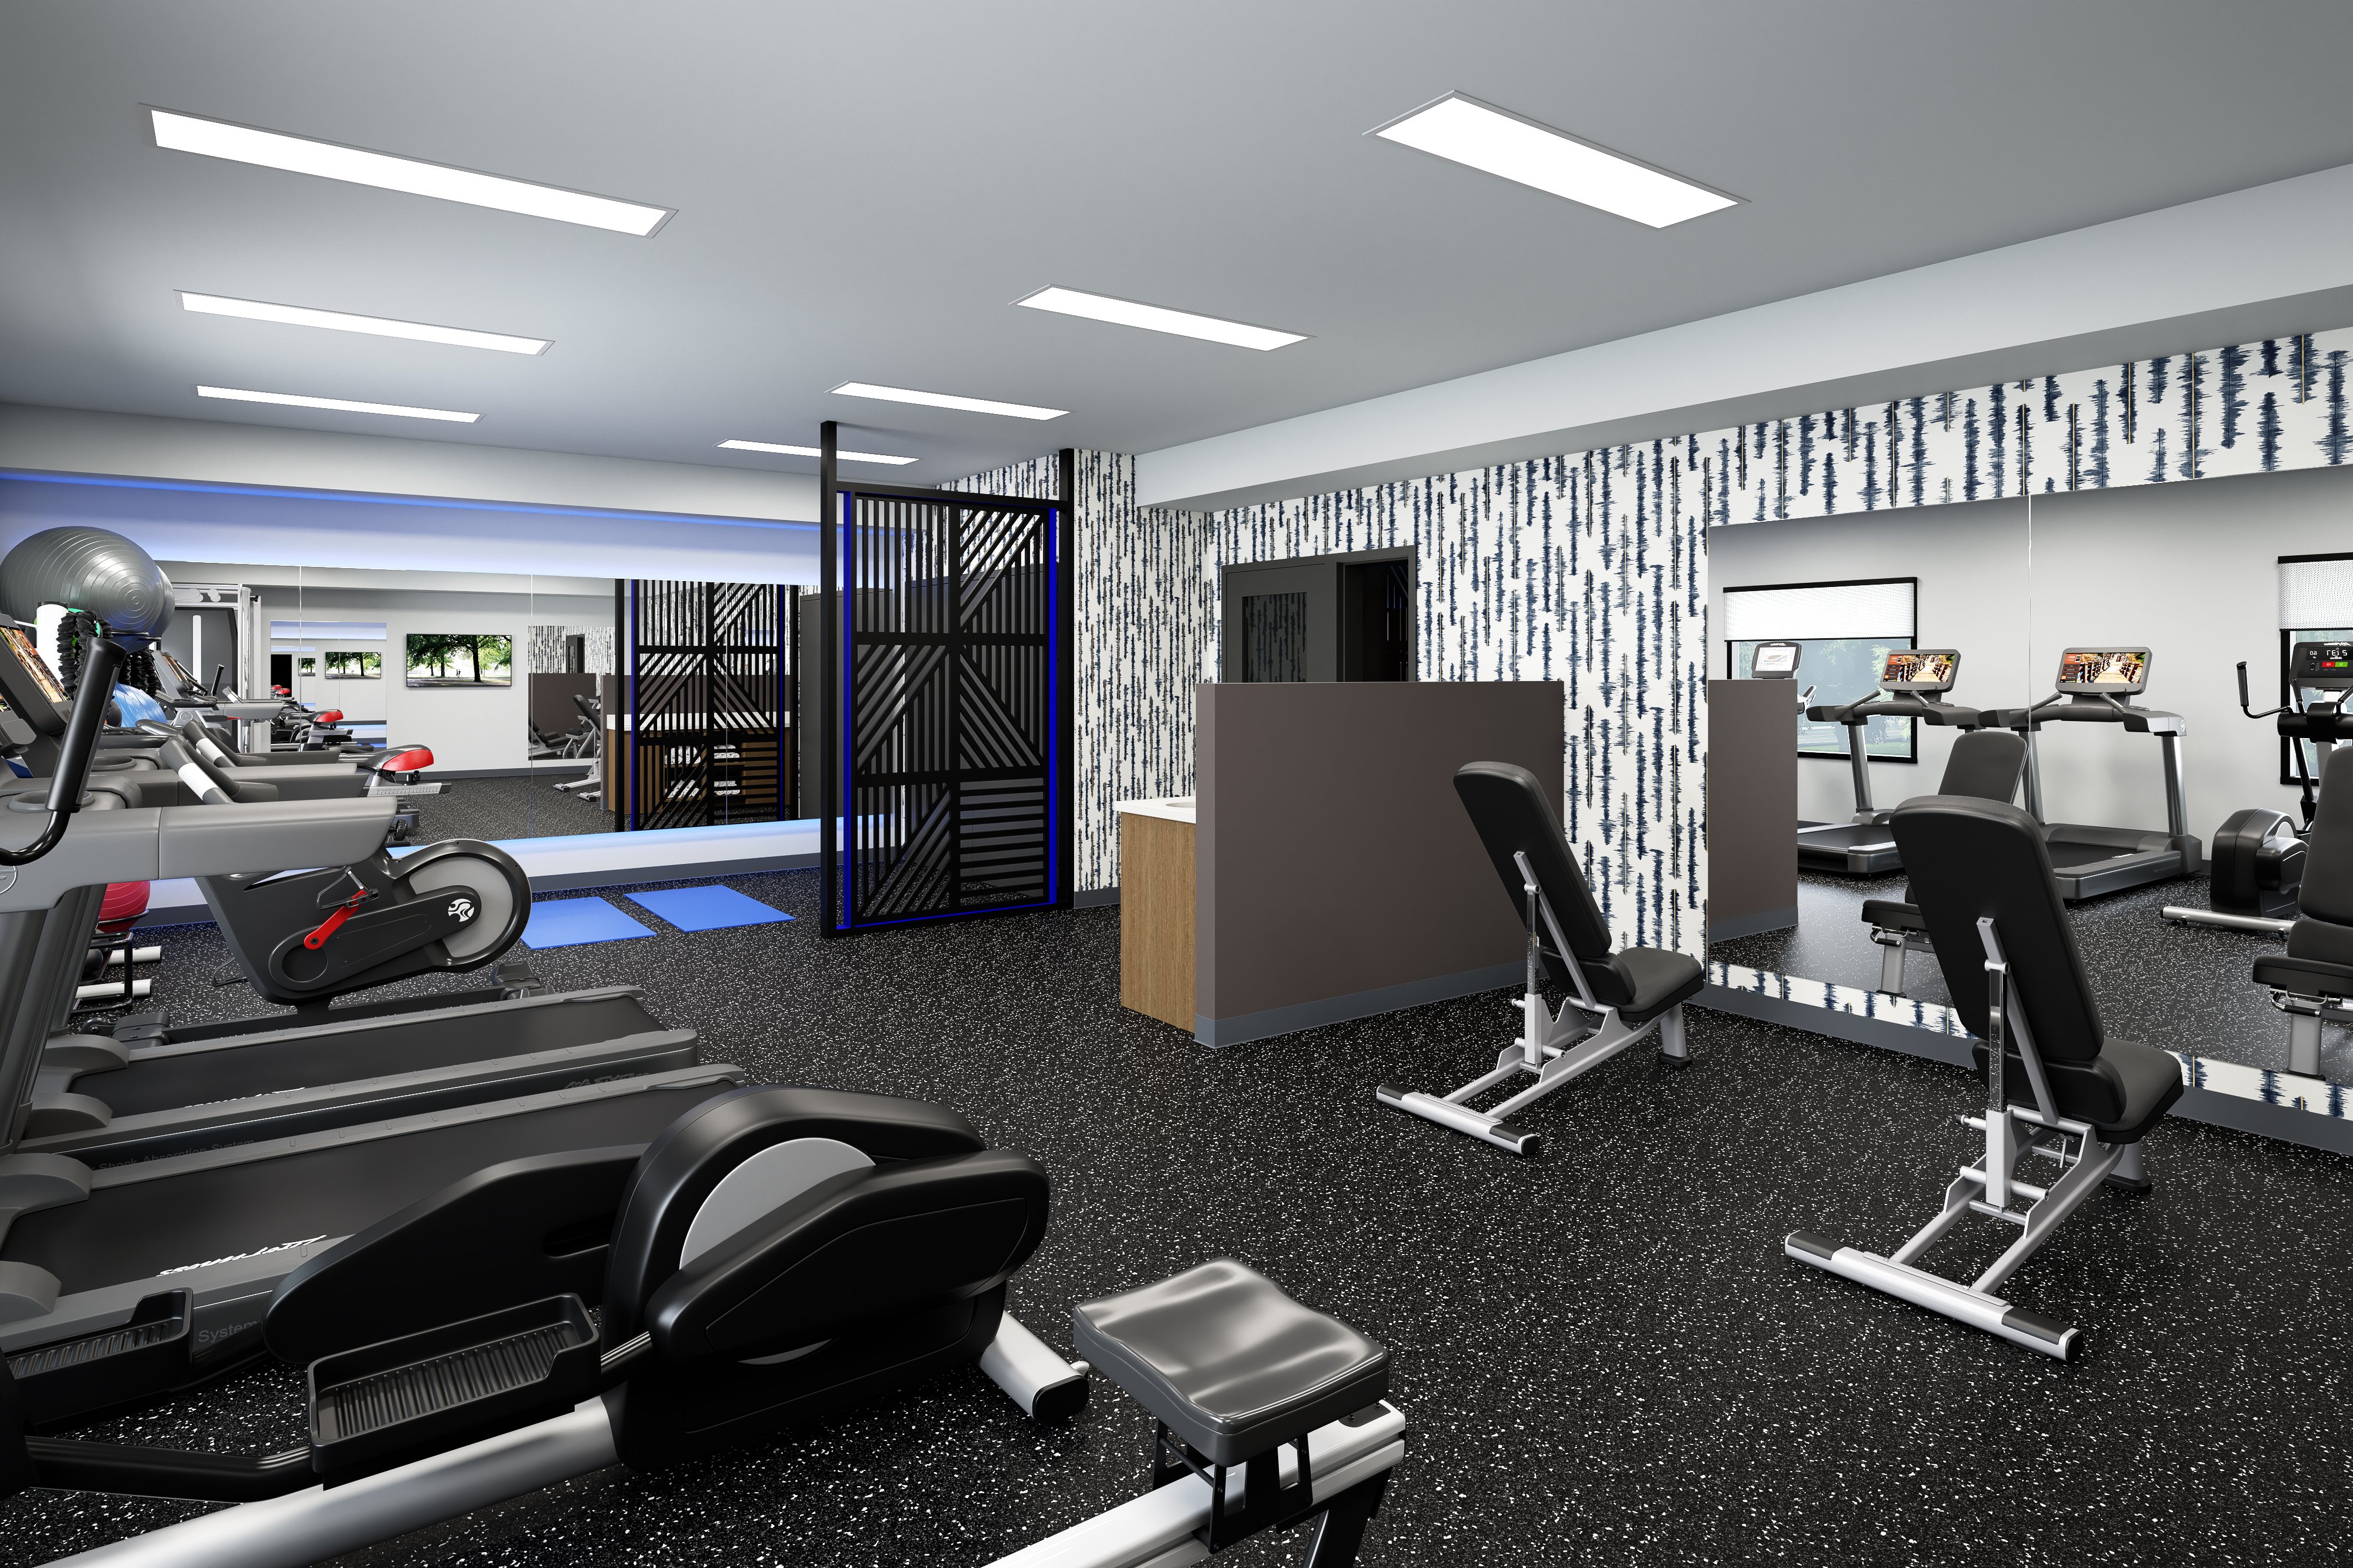 Continue your workout regimen in our 24 hour Fitness Center.